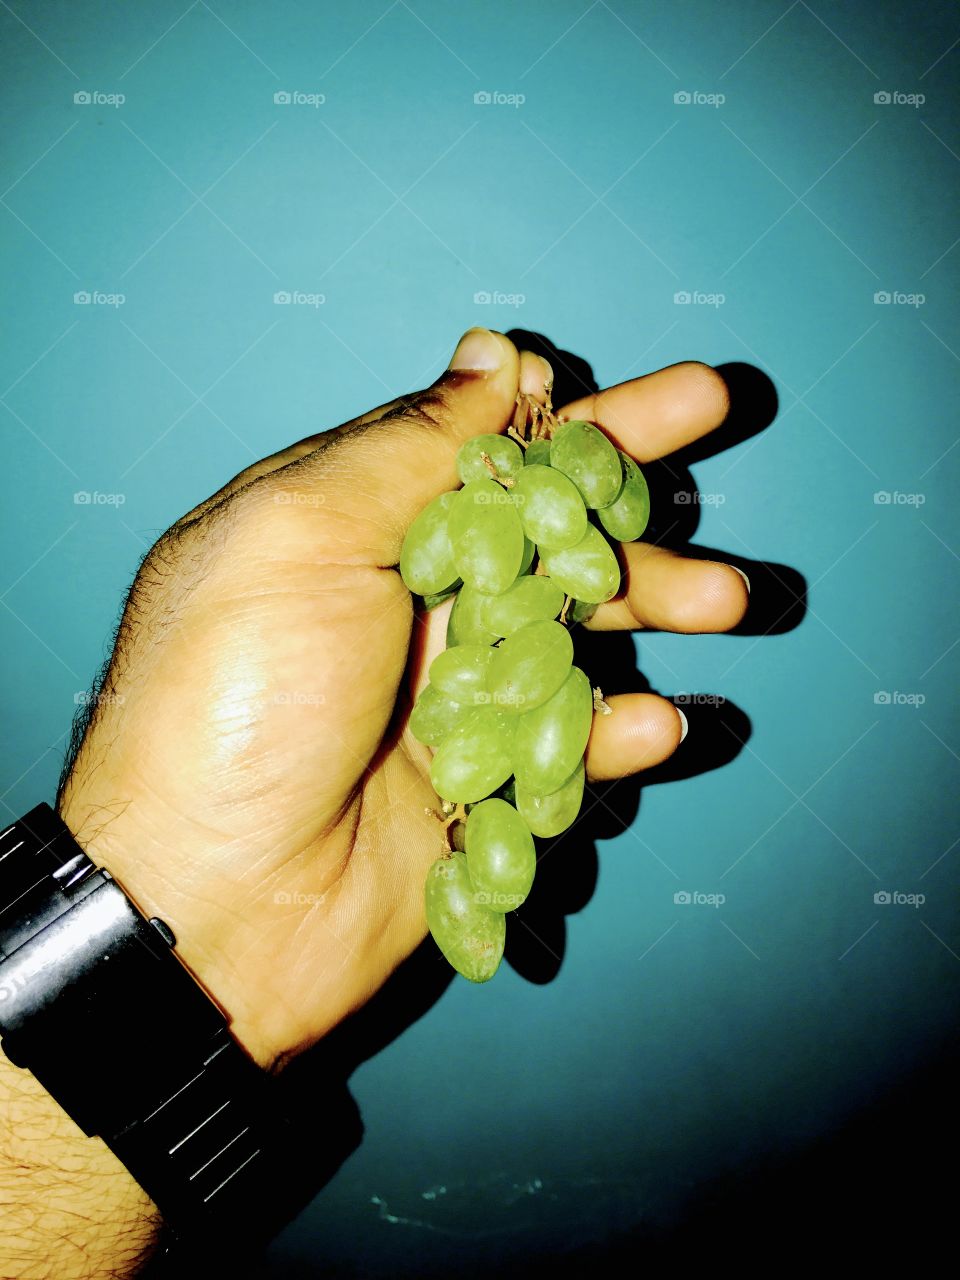 Holding the bunch of grapes